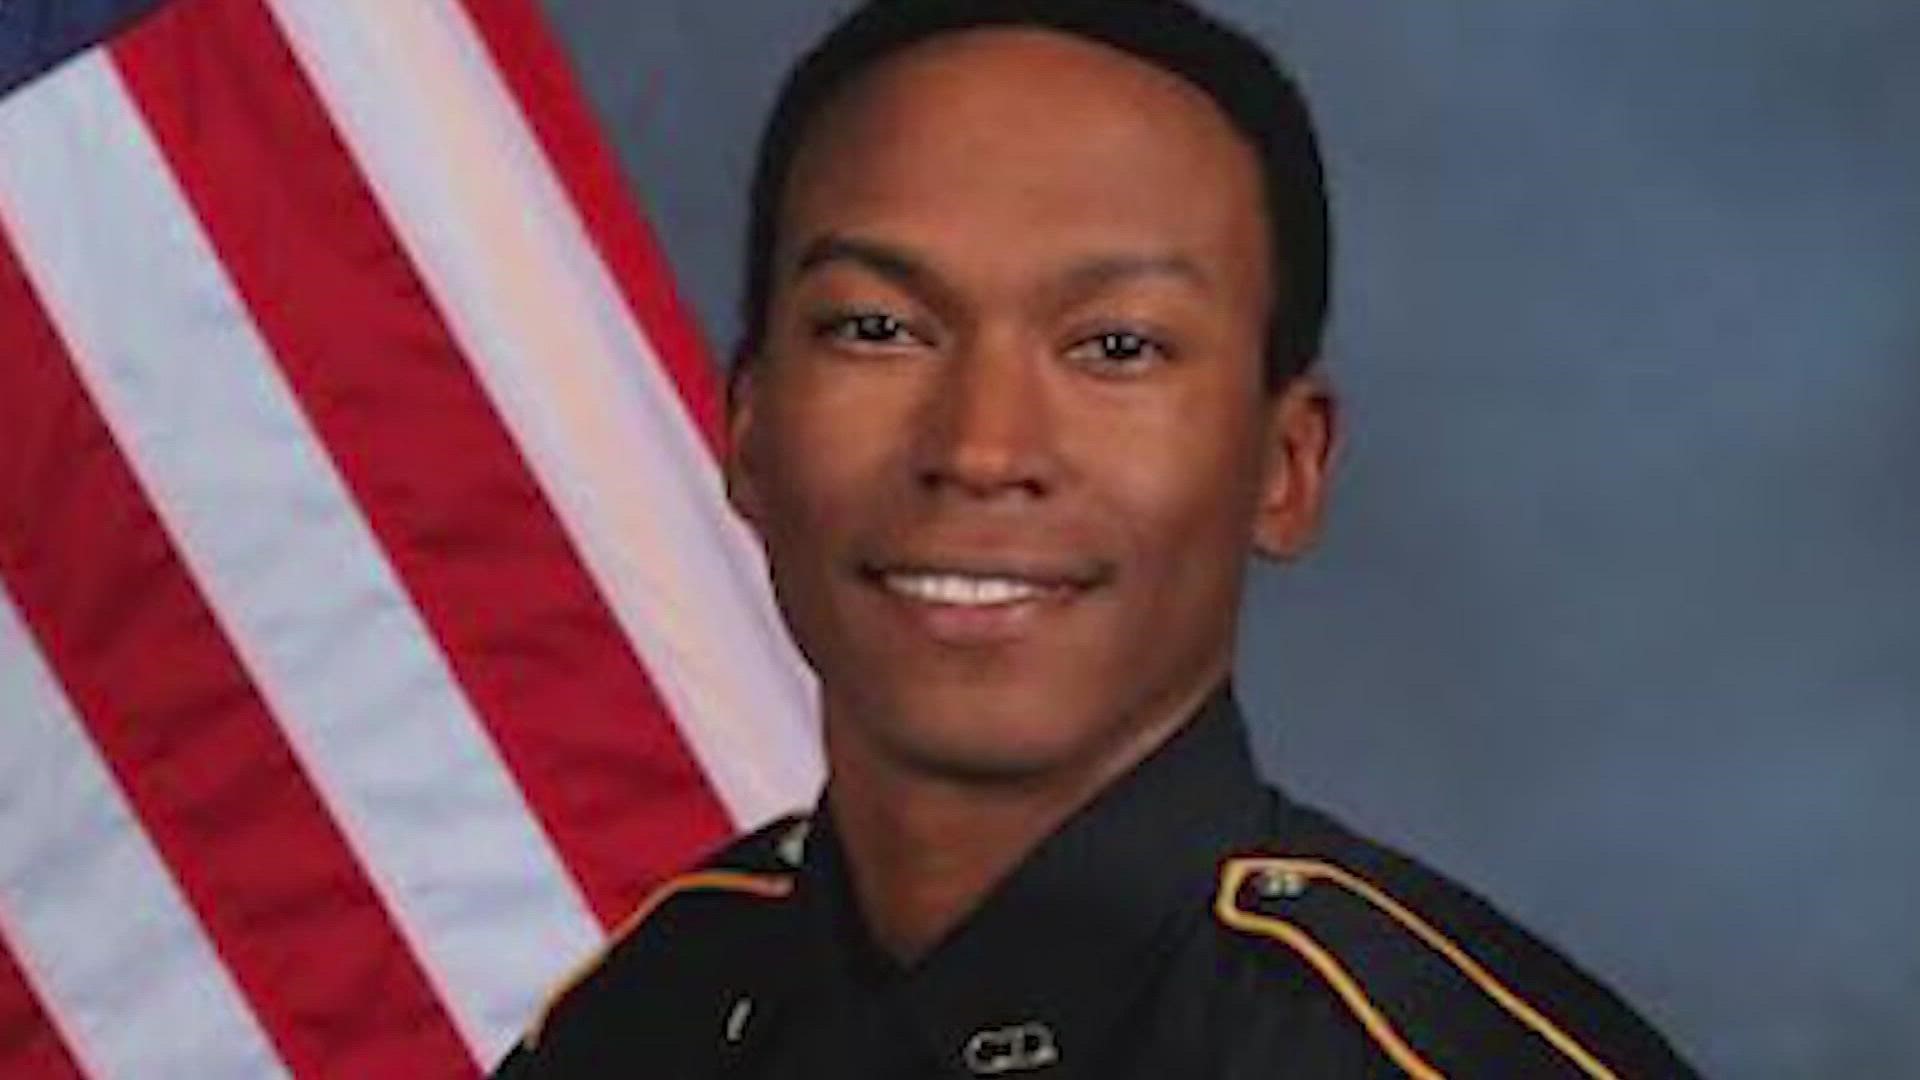 Deputy Omar Ursin, 37, was off duty when someone shot and killed him in northeast Harris County. The shooter is still on the loose.